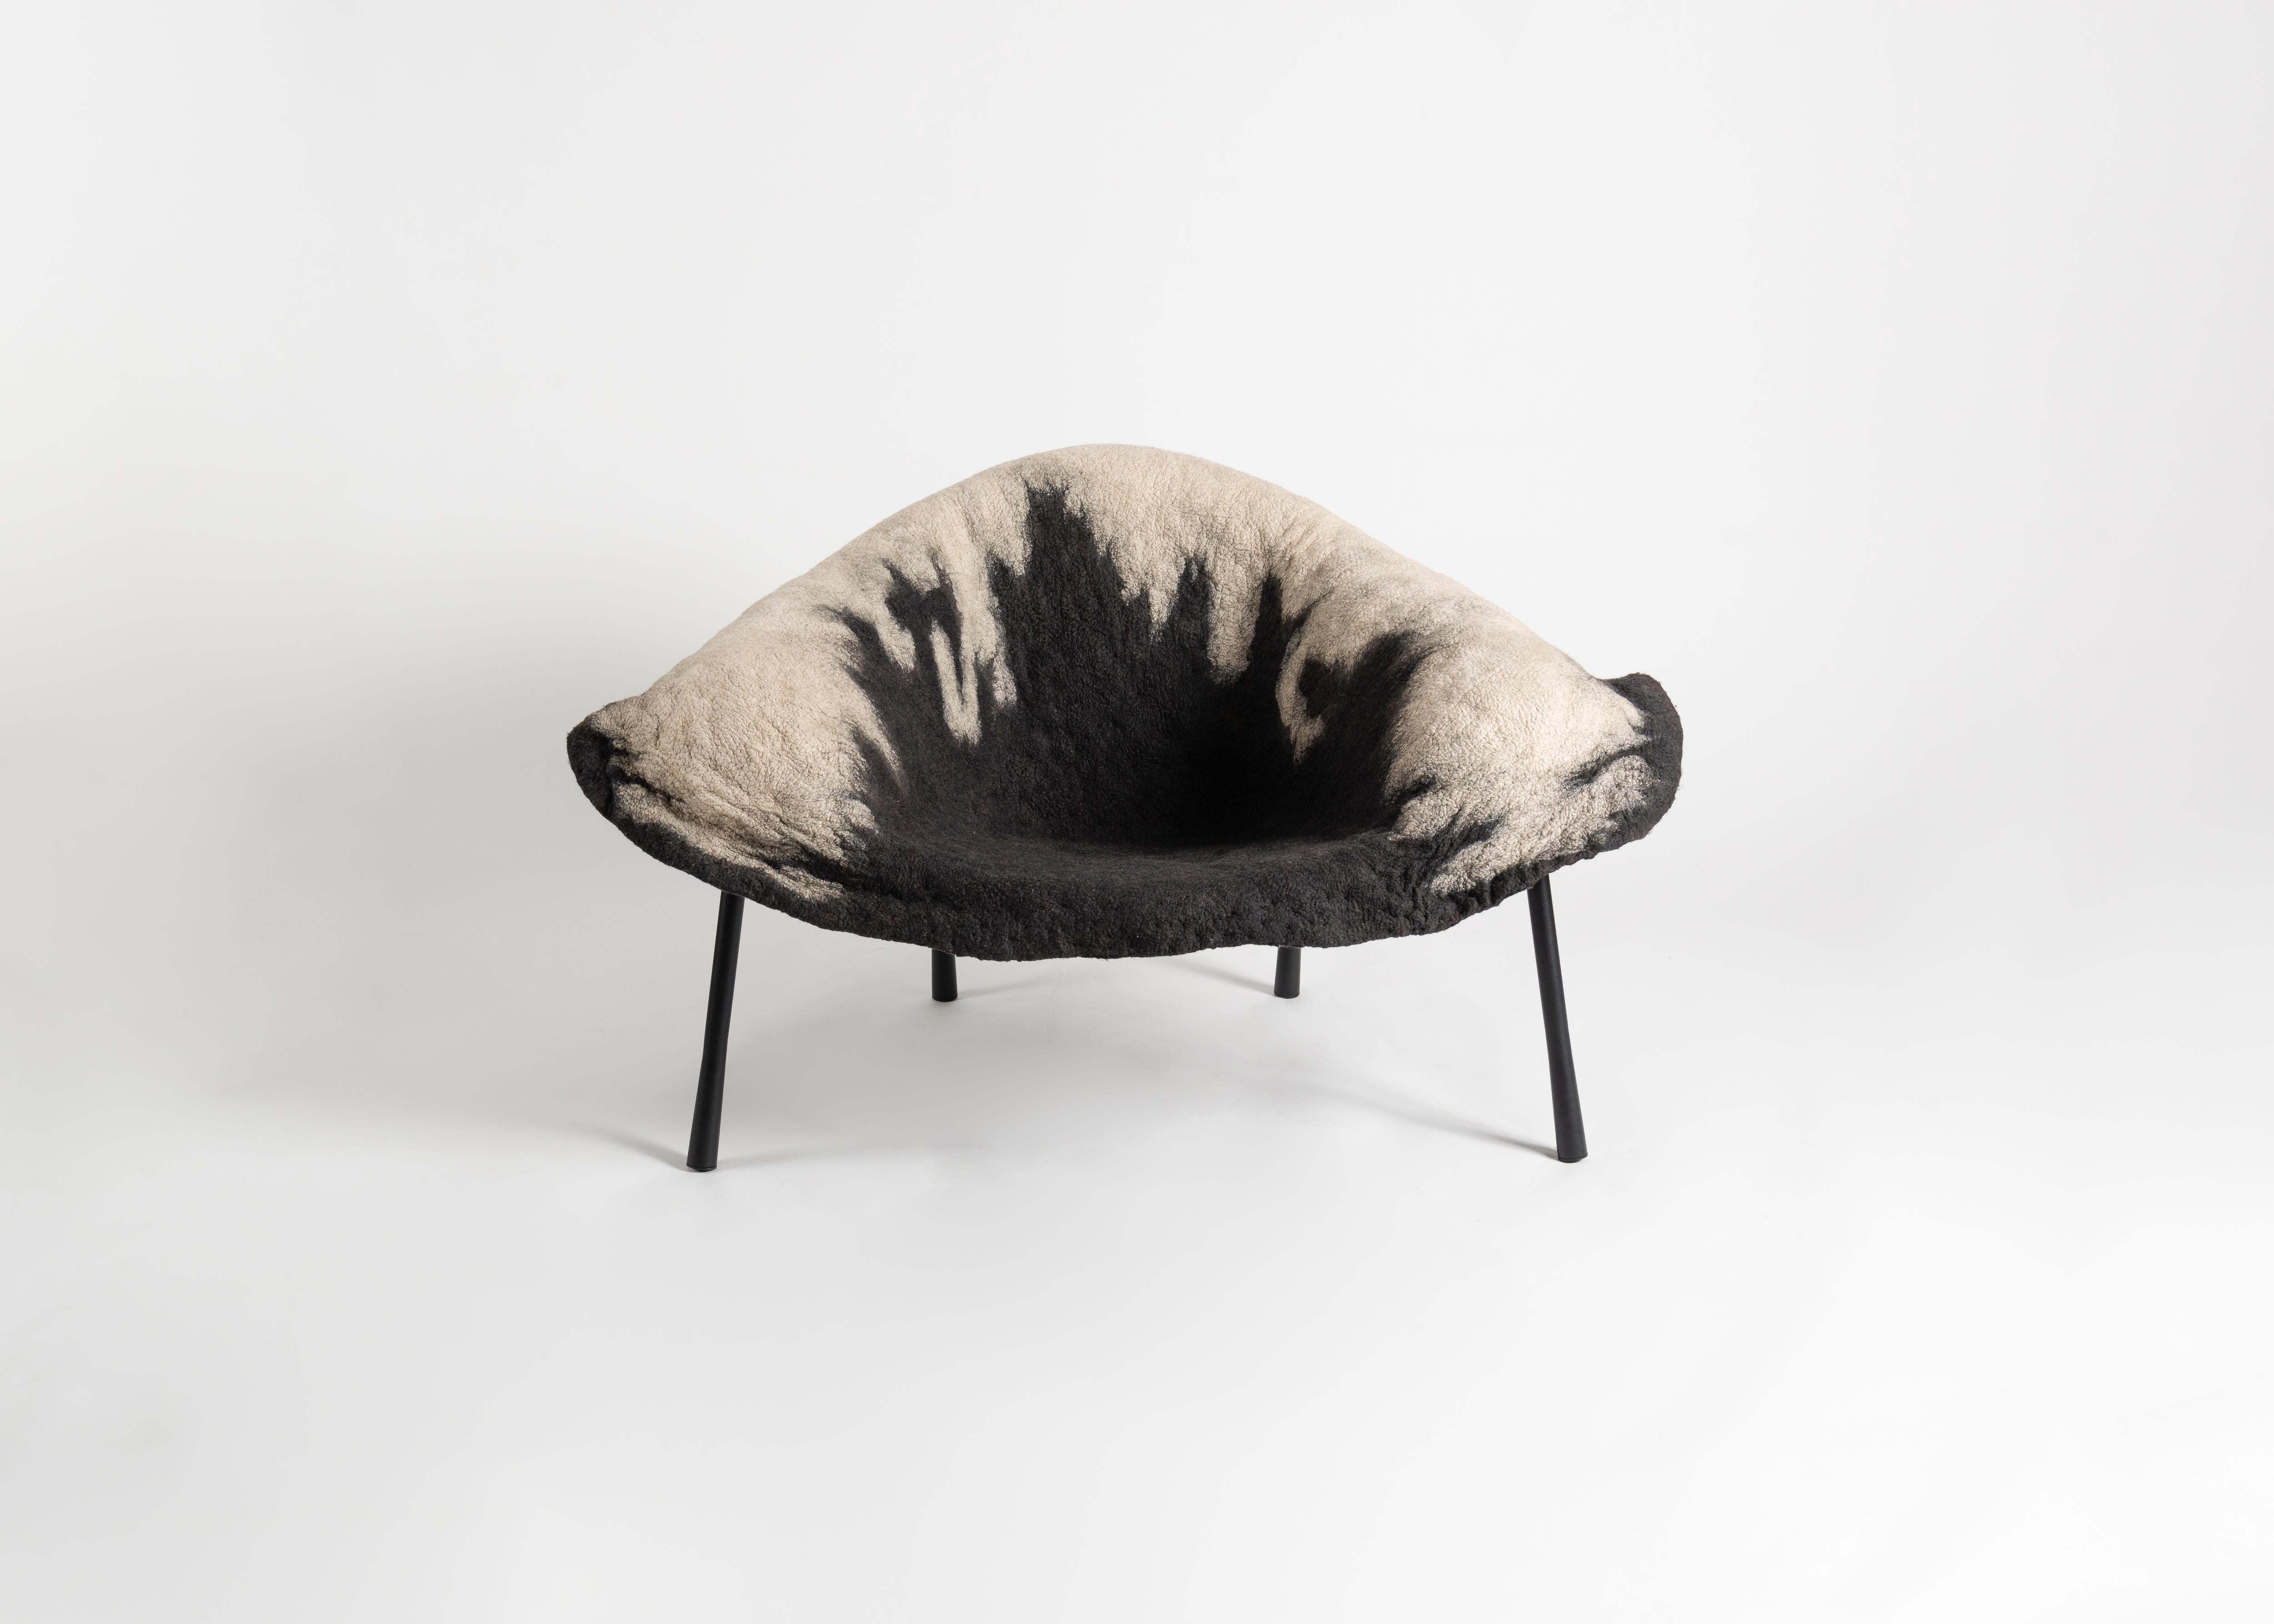 Rapa Series consists of pieces felted by hand, recalling ancient textiles. Utilizing wool and silk, these one-of-a-kind fiber art pieces are softly molded over organic sculptural structures, which are both artistic and comfortable.

About Ayala